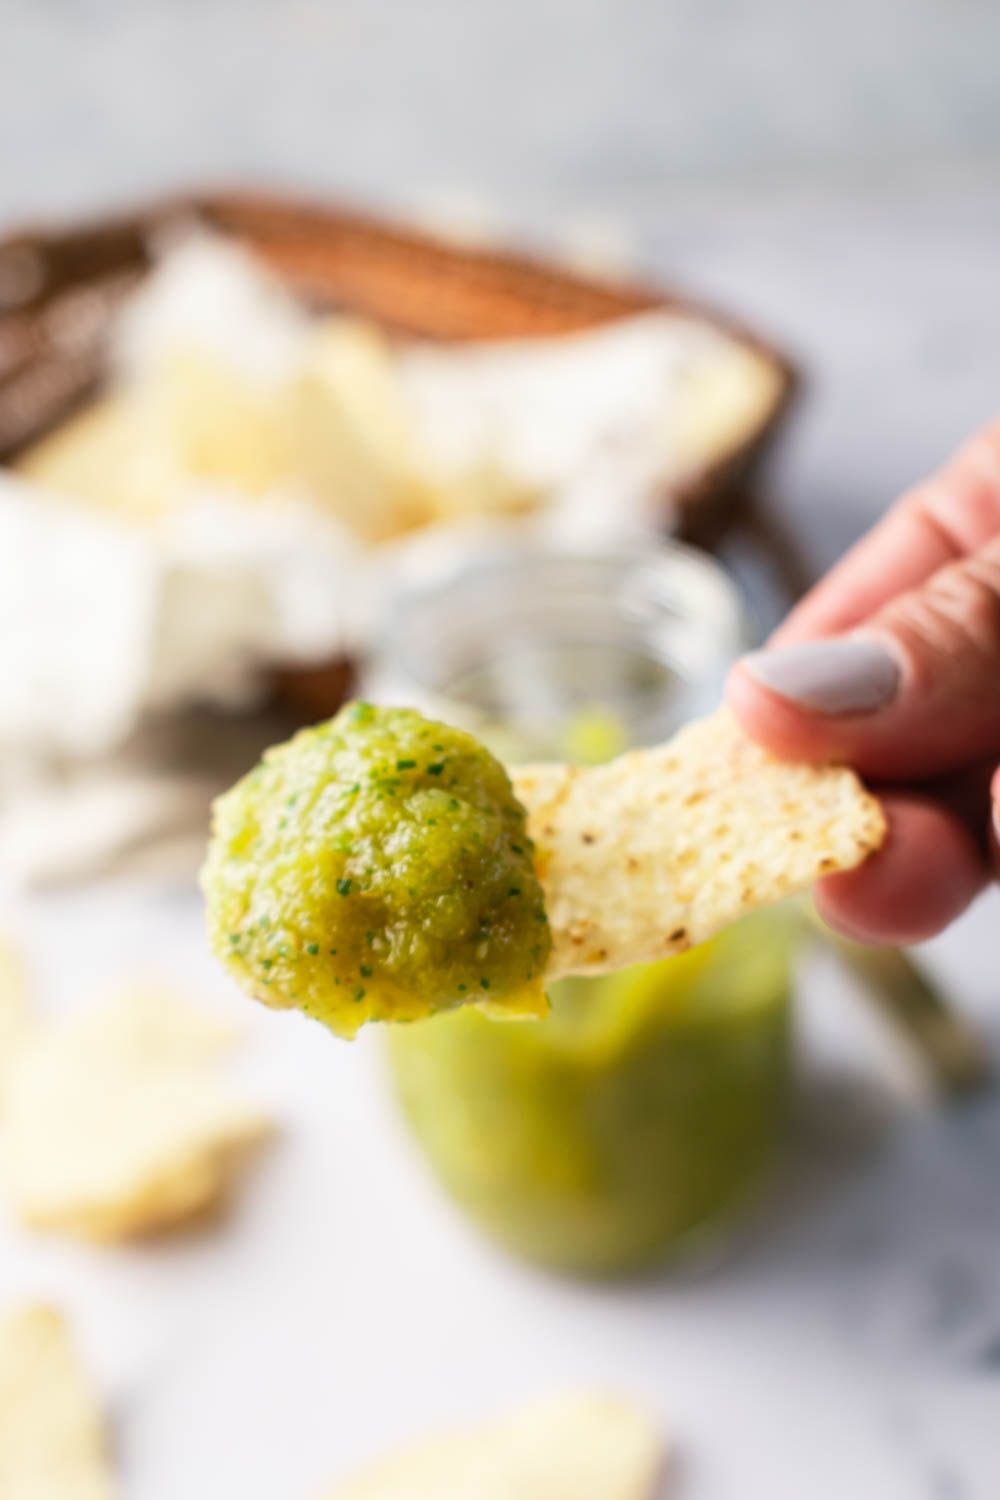 Green salsa verde with blended tomatillos and jalapeños on a tortilla chip.